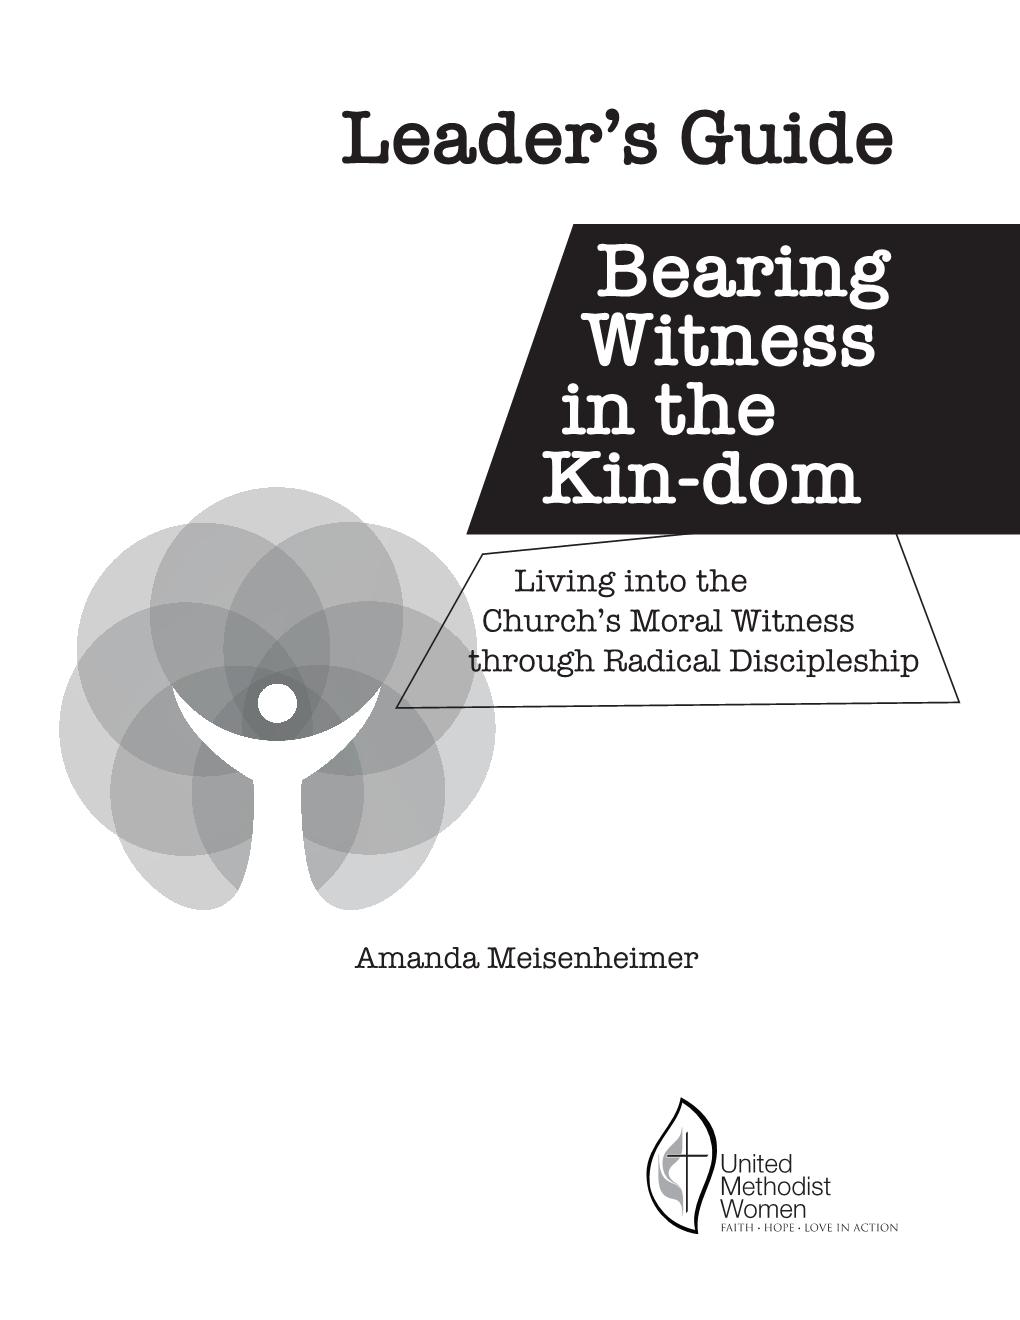 Leader's Guide: Bearing Witness in the Kin-Dom